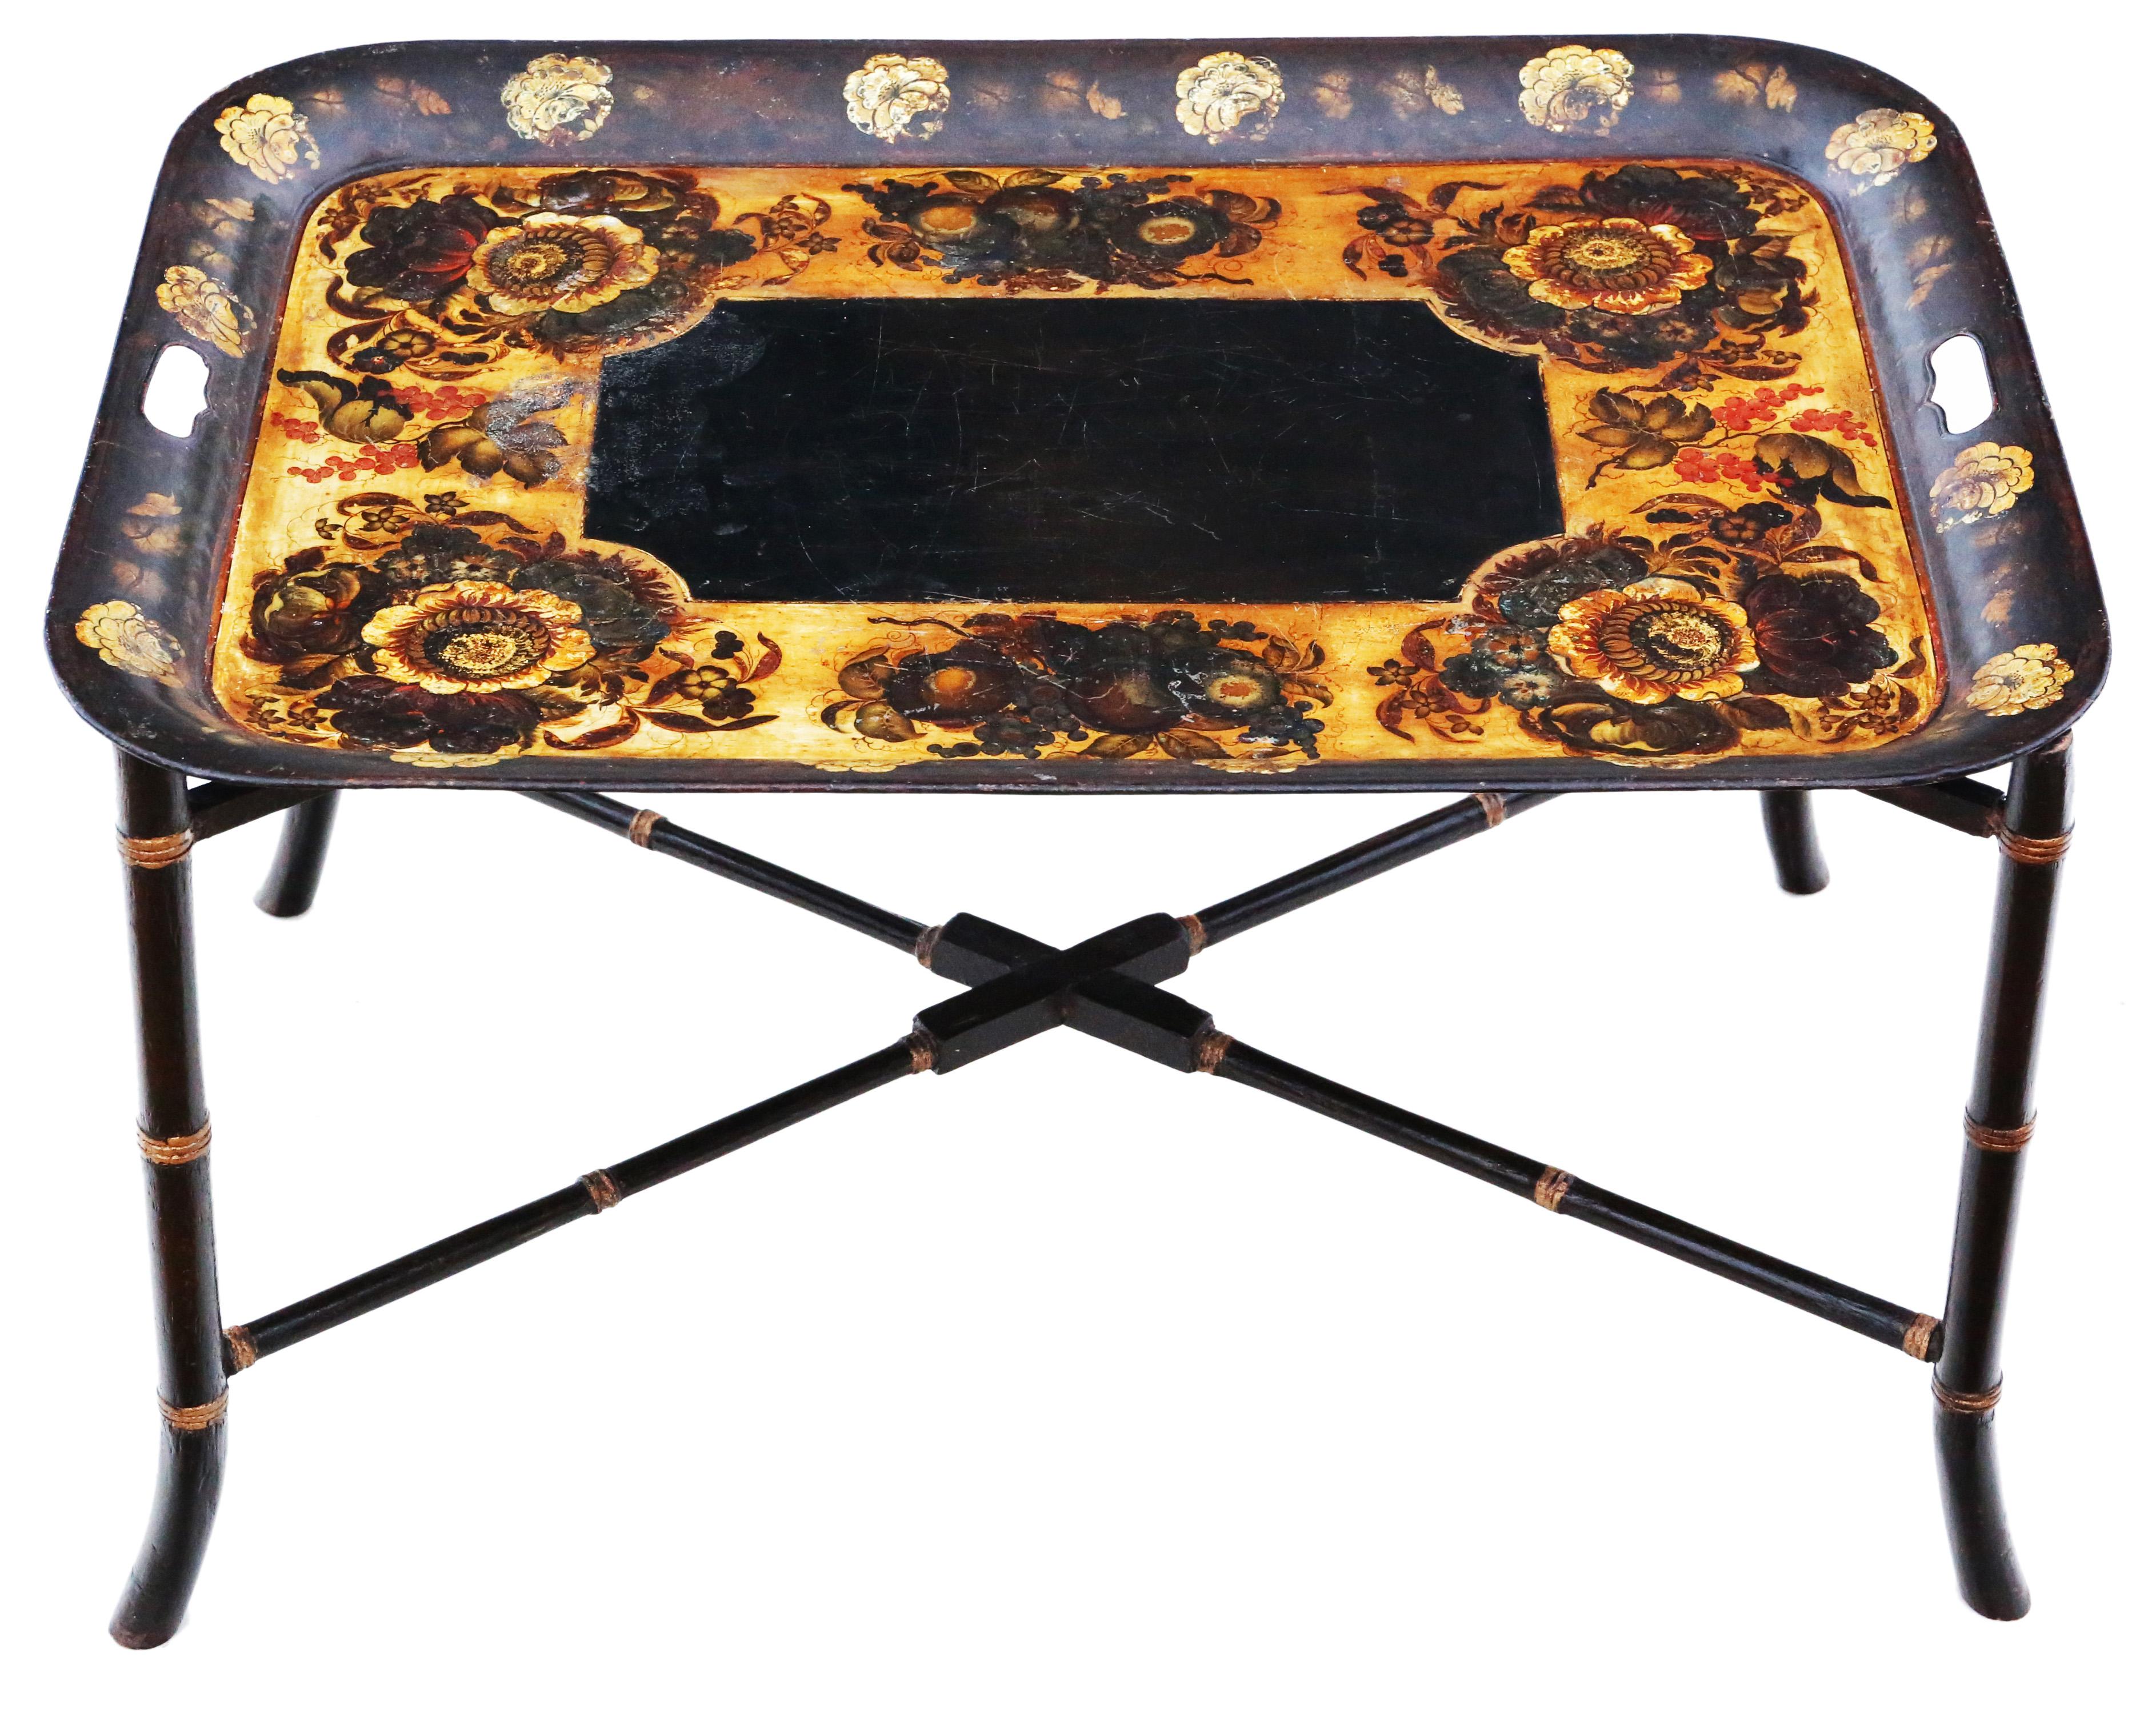 Antique quality Victorian 19th Century decorated black lacquer coffee table tray on stand.
 
Would make a great coffee table. No loose joints.
Quality metal tray.

Very attractive, with lovely proportions and styling. No woodworm.

Lovely age colour